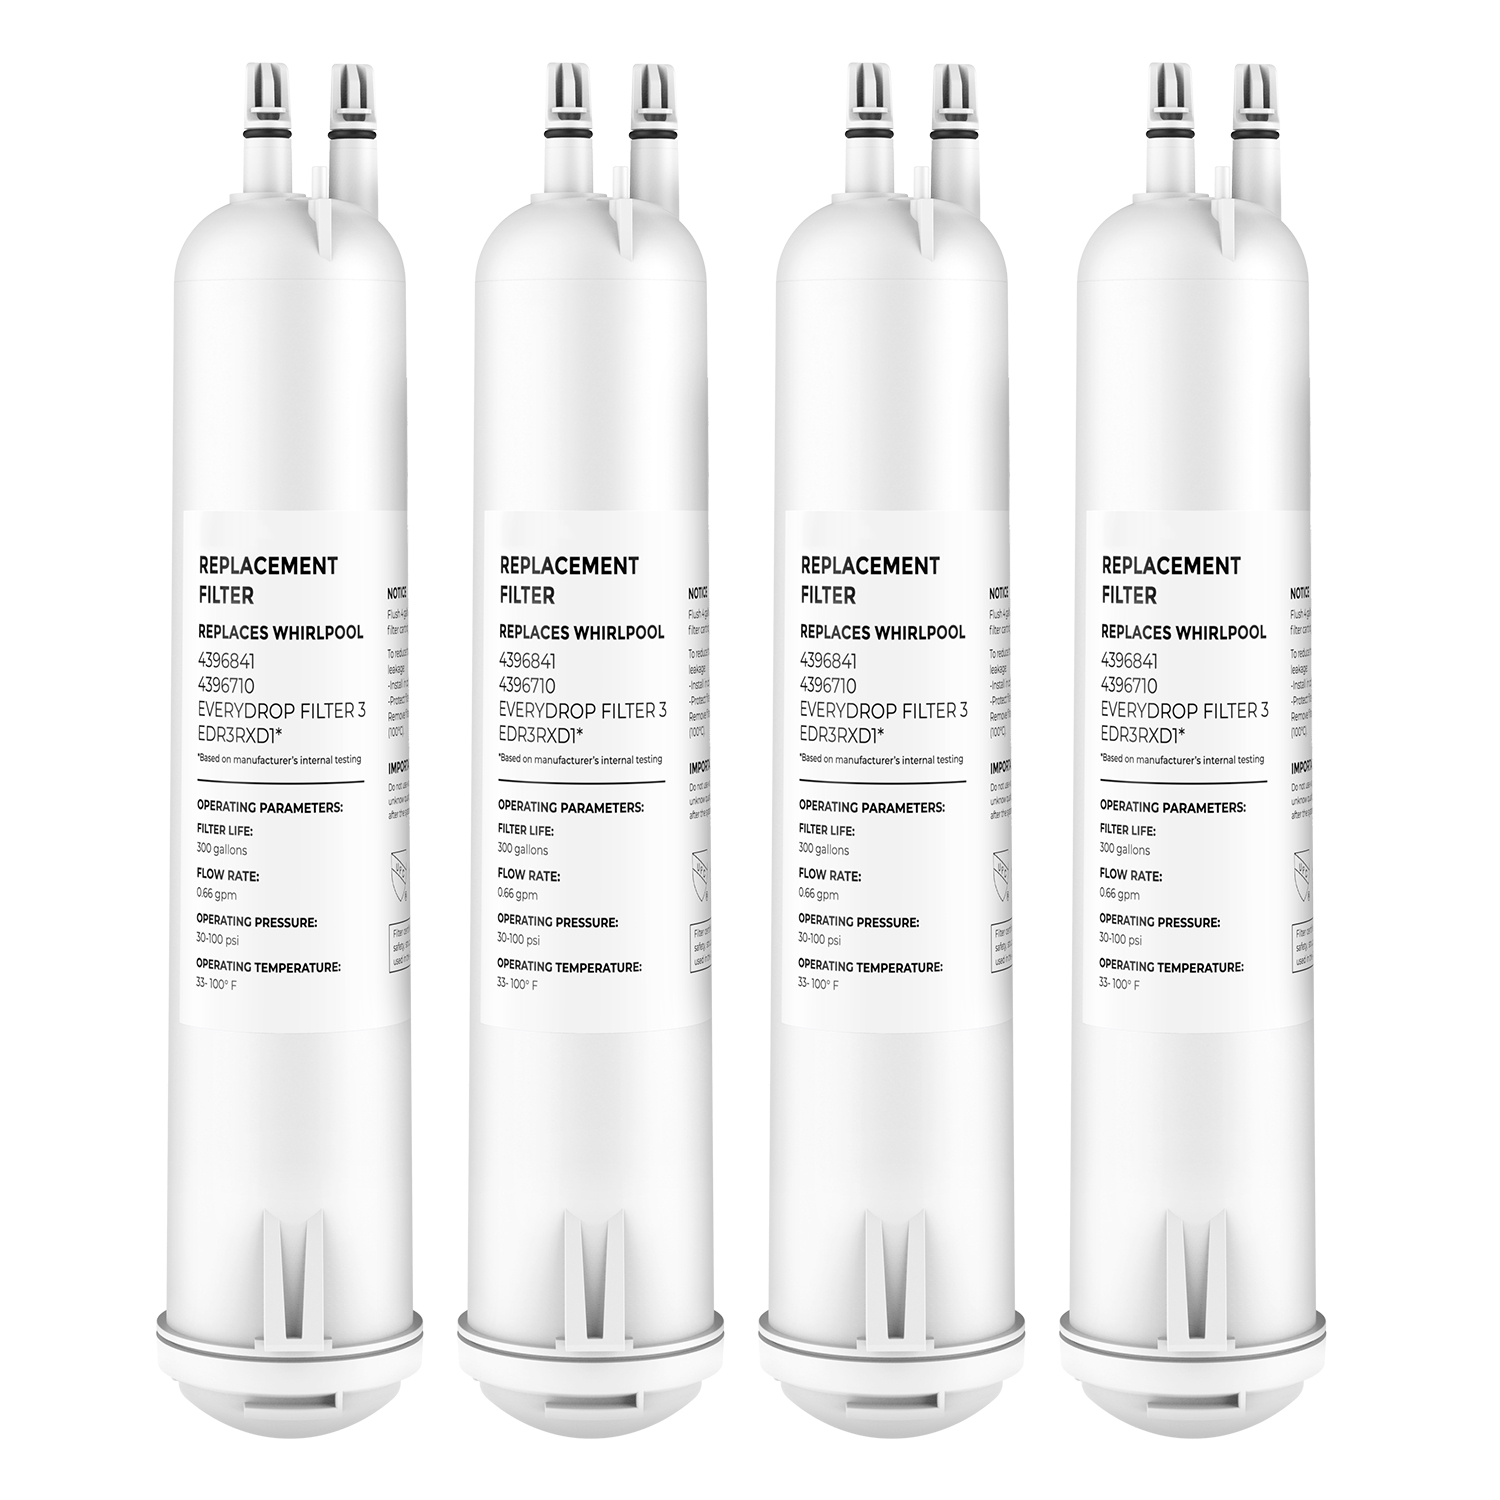 Compatible 4396841,EDR3RXD1,4396710,46-9083 Refrigerator Water Filter 3 by Pzfilters 4Pcs